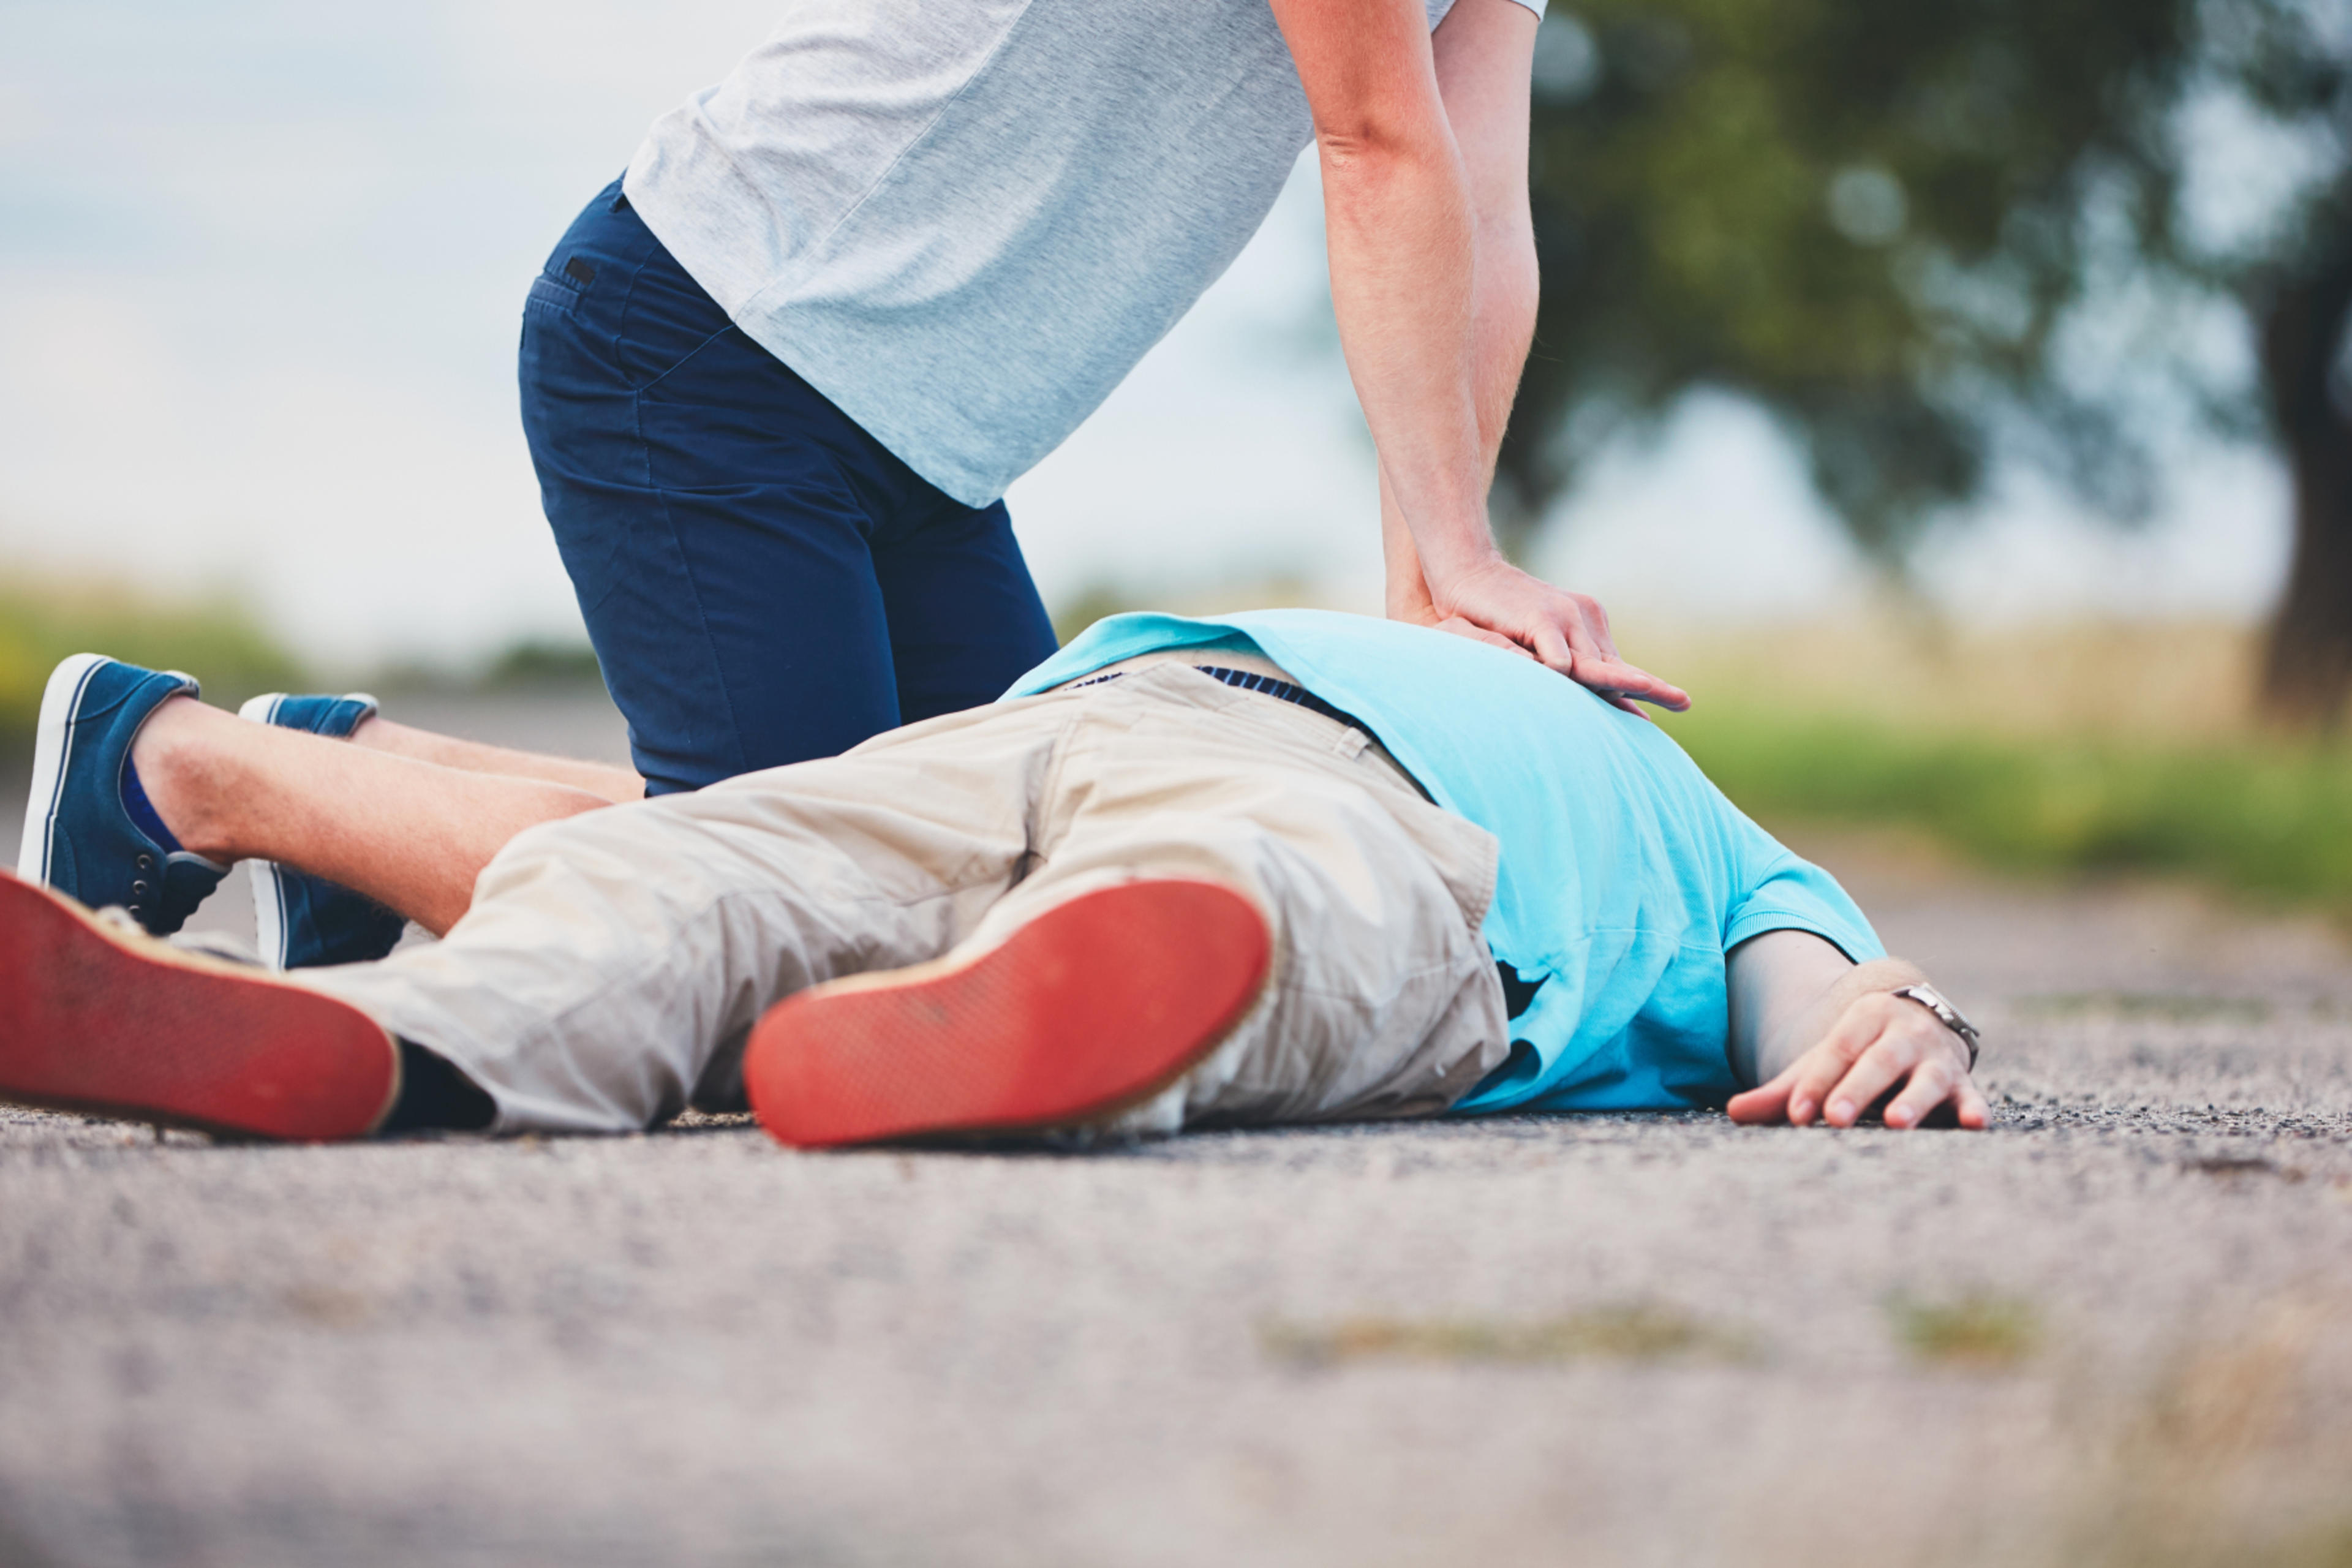 A helper kneeling and giving CPR to a person collapsed in the street.